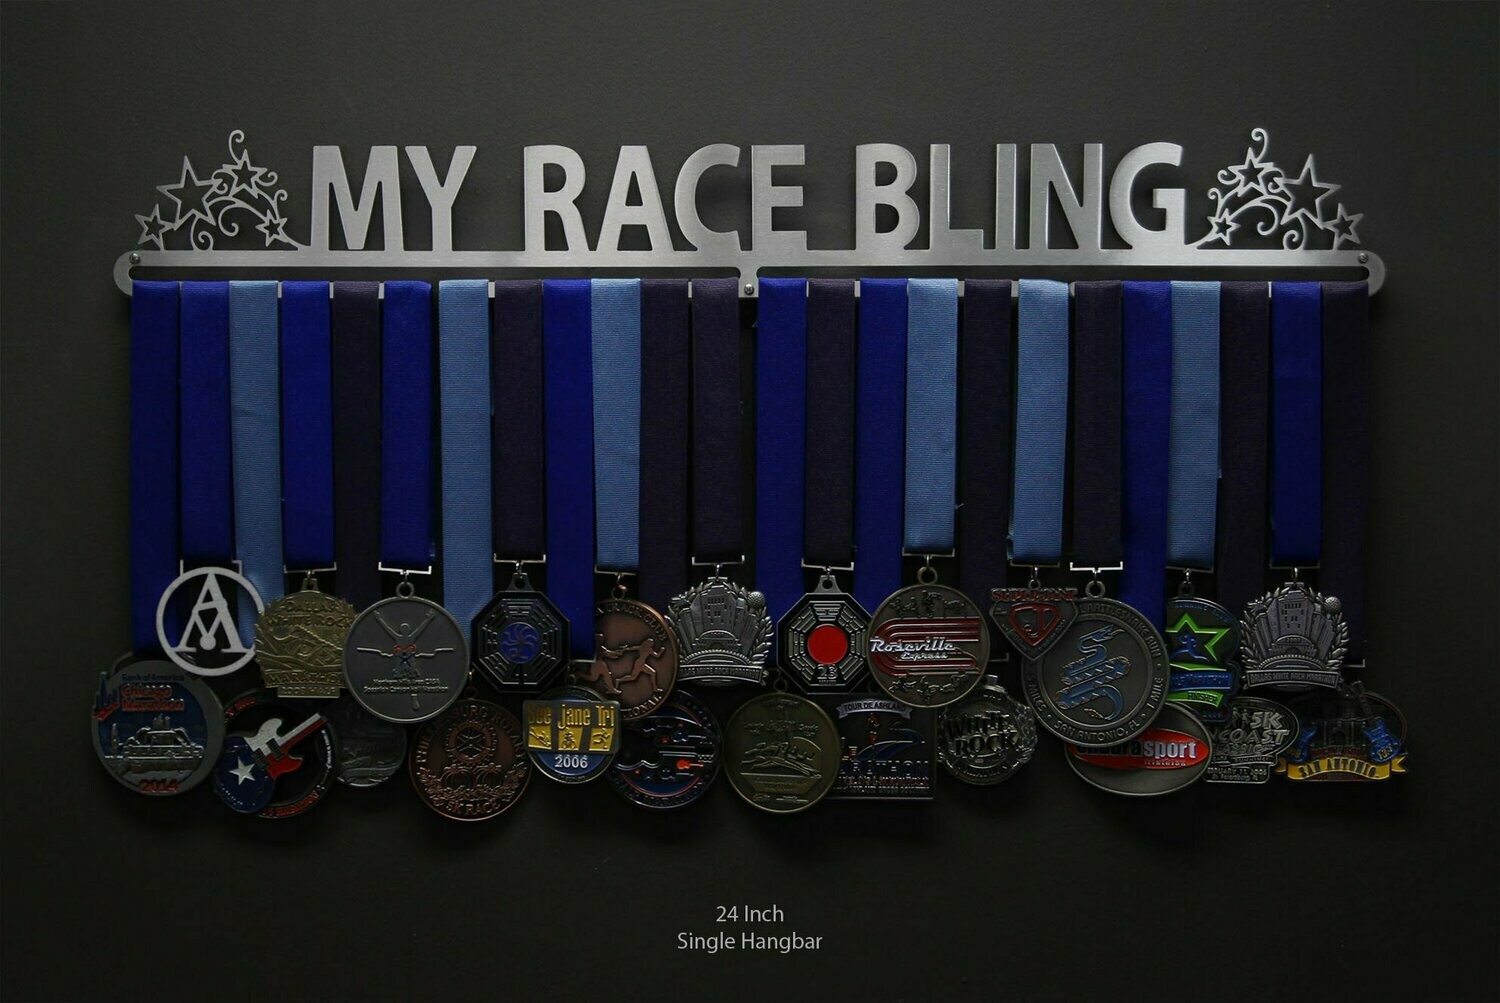 My Race Bling with stars Medal Display